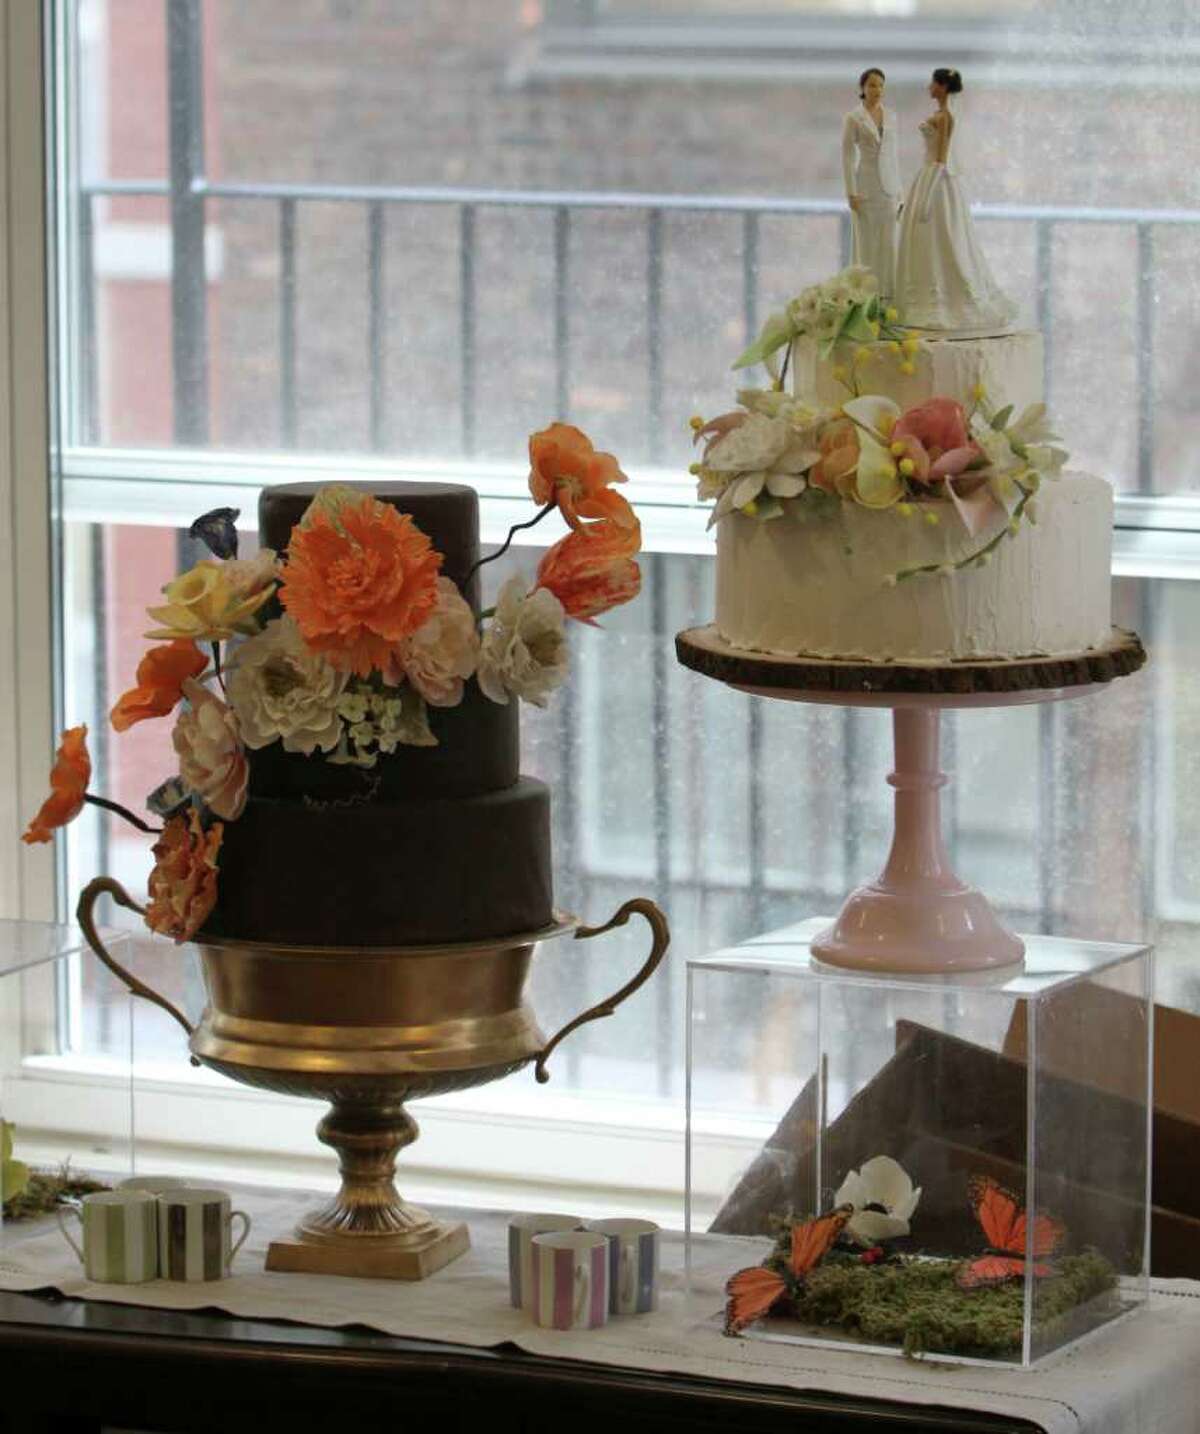 An almond cake with New York City rooftop honey buttercream icing, right, and a chocolate cake with chocolate gnash icing are on display at the Sugar Flower Cake Shop, Monday, June 27, 2011 in New York. (AP Photo/Mary Altaffer)